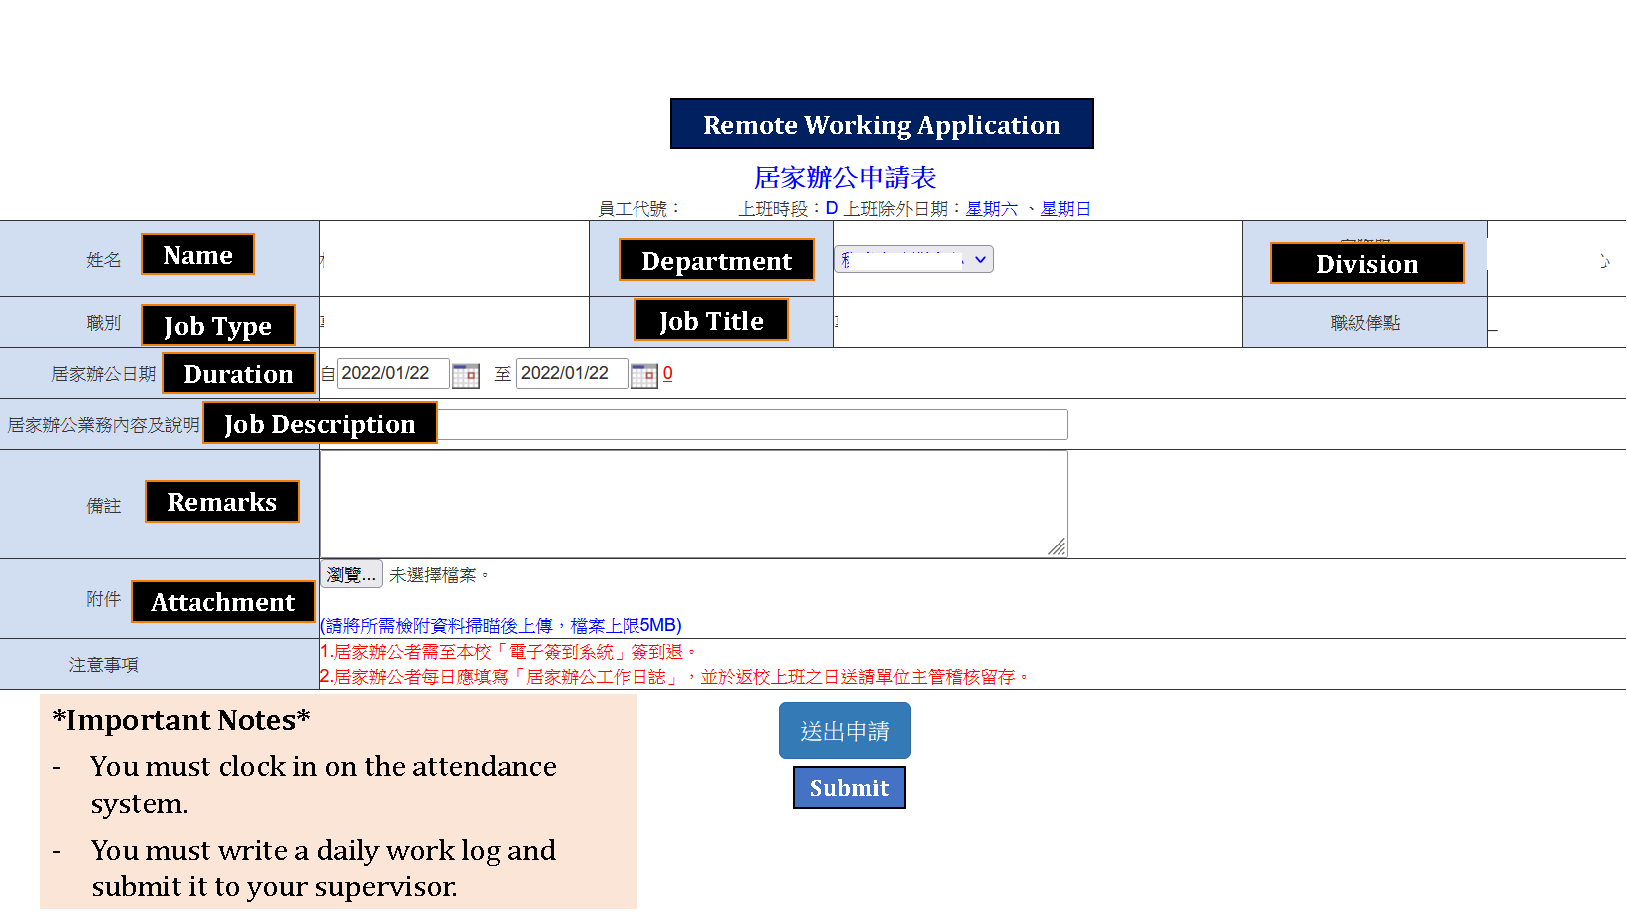 NKUST-How to Apply for Work from Home-2